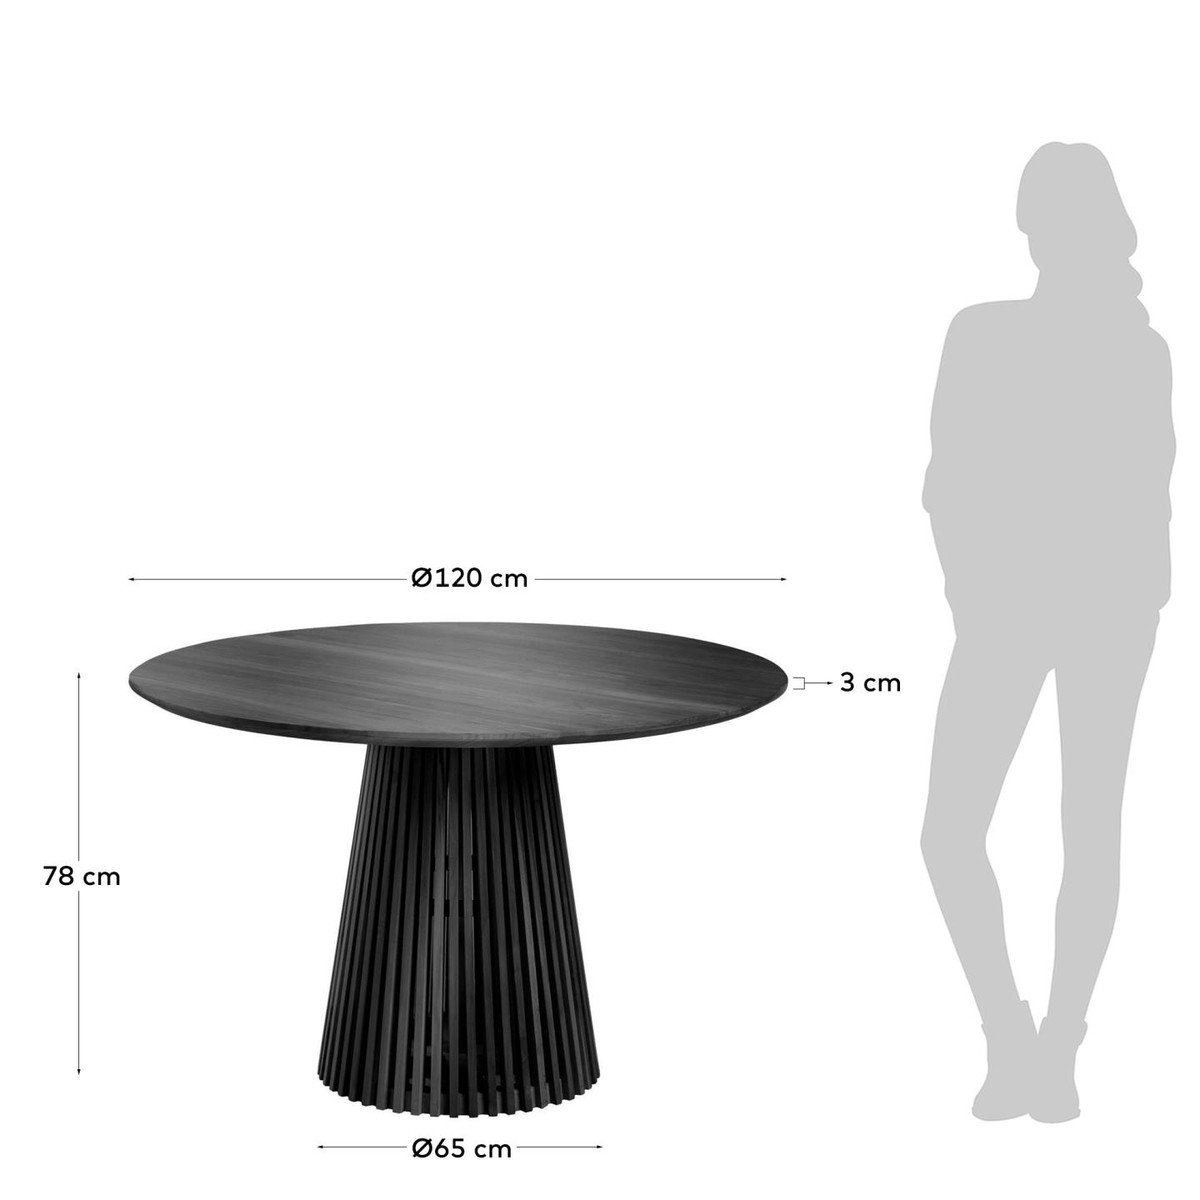 Rume Solid Timber Round Dining Table - Black - Dining Tables